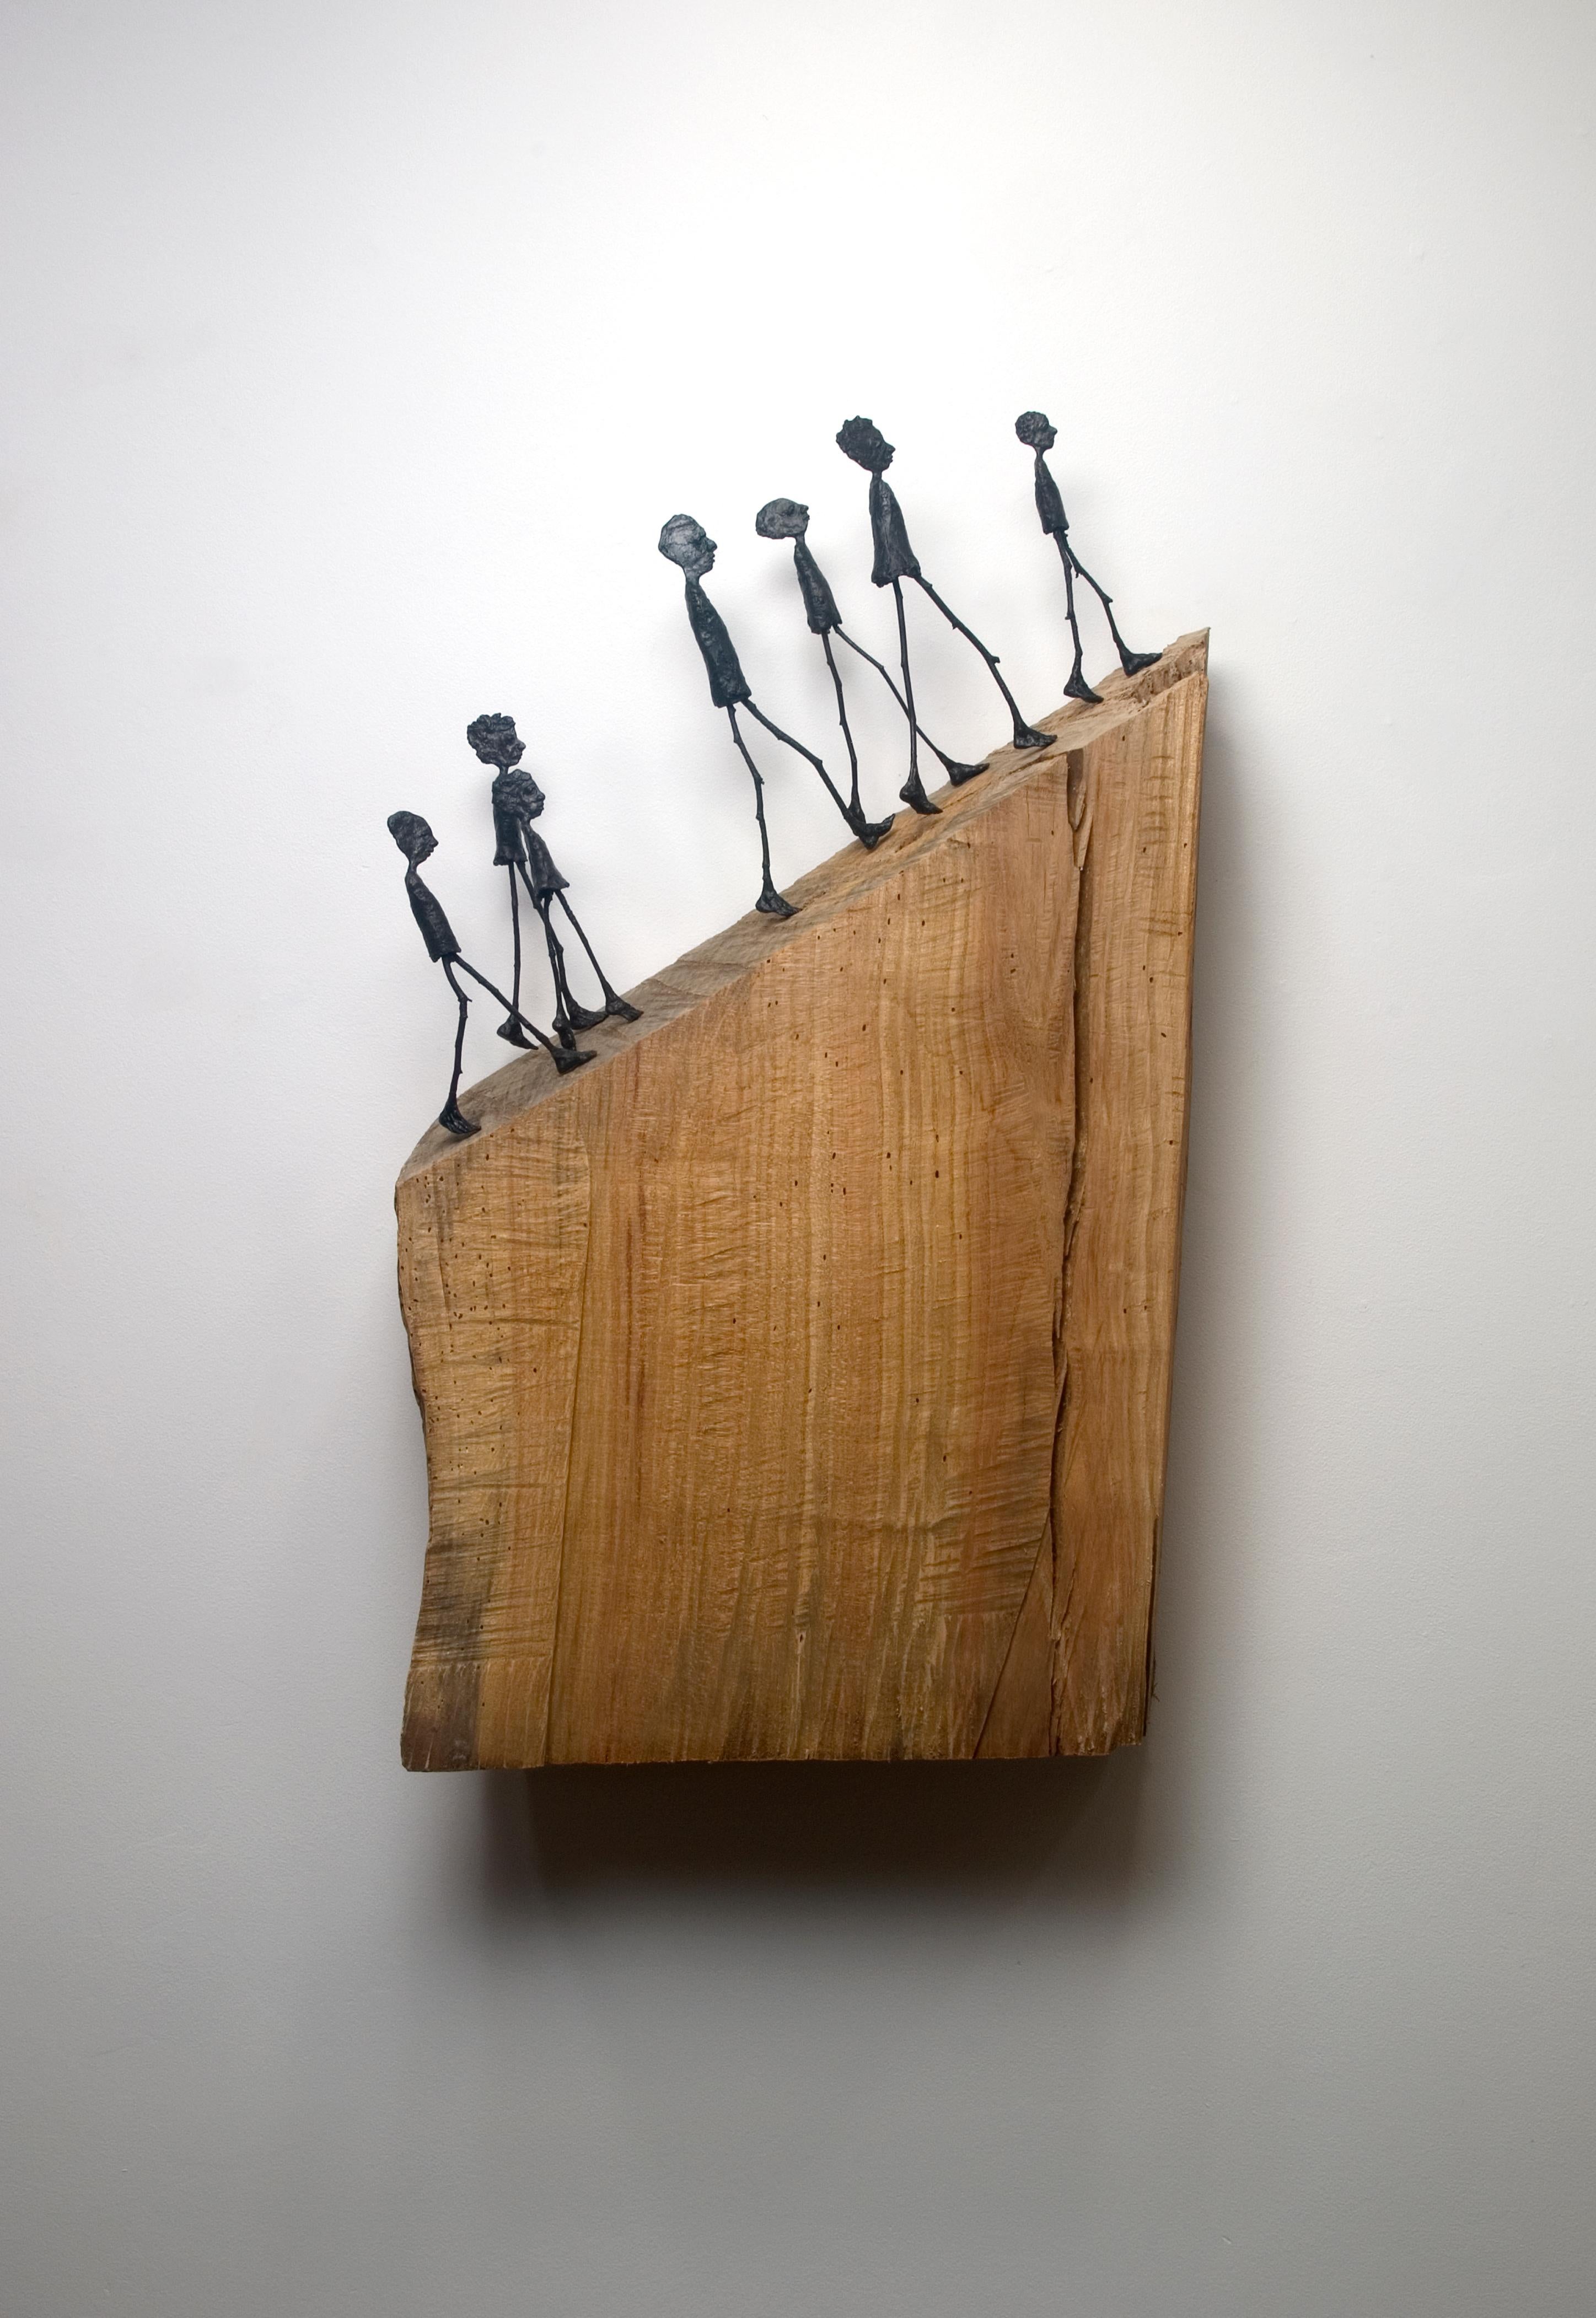 Holly Wilson Figurative Sculpture - "Gathering"